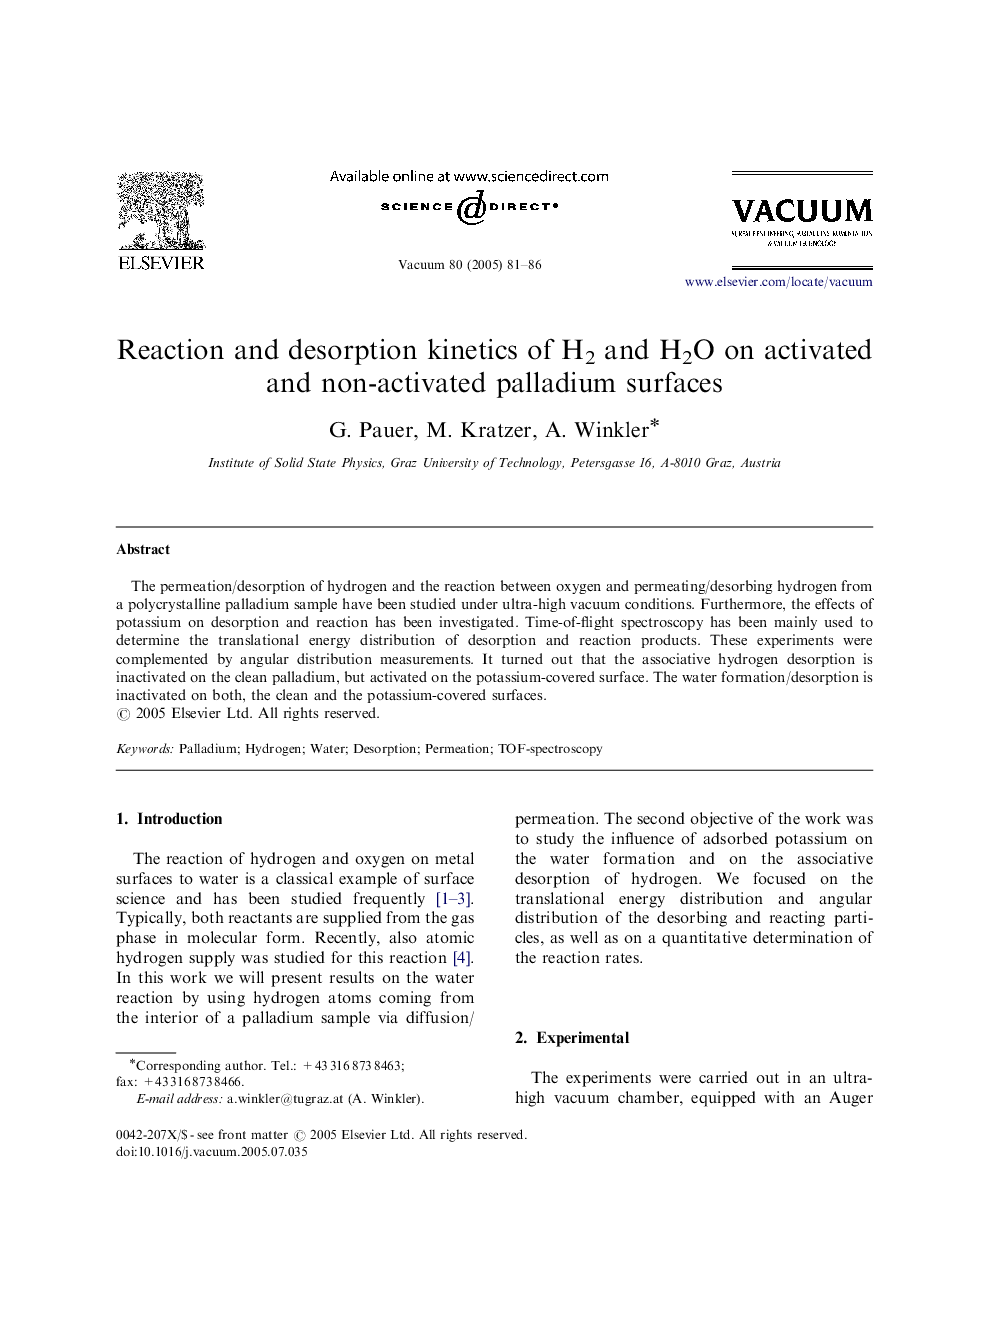 Reaction and desorption kinetics of H2 and H2O on activated and non-activated palladium surfaces